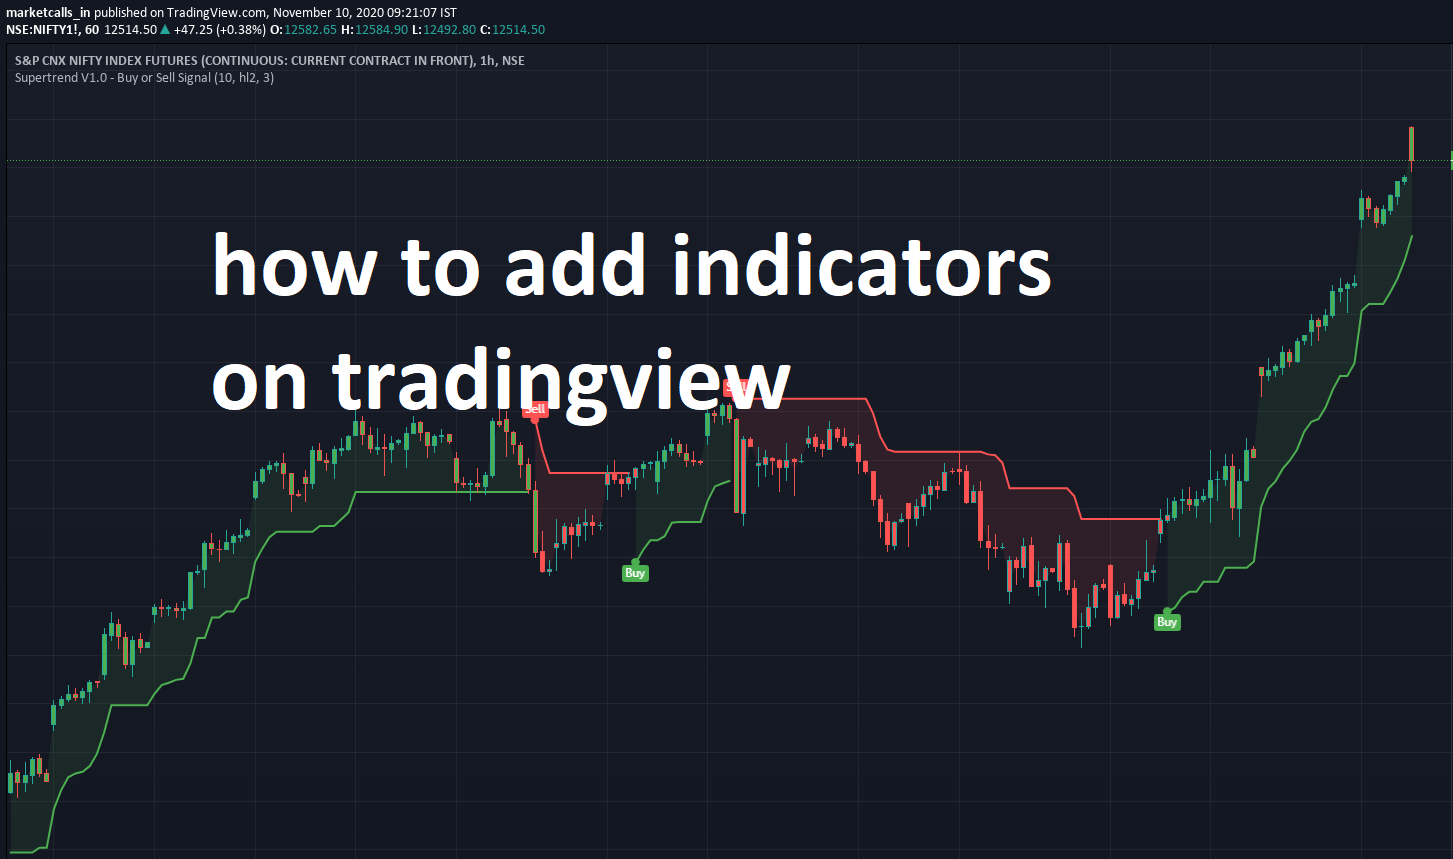 how to add indicators on tradingview